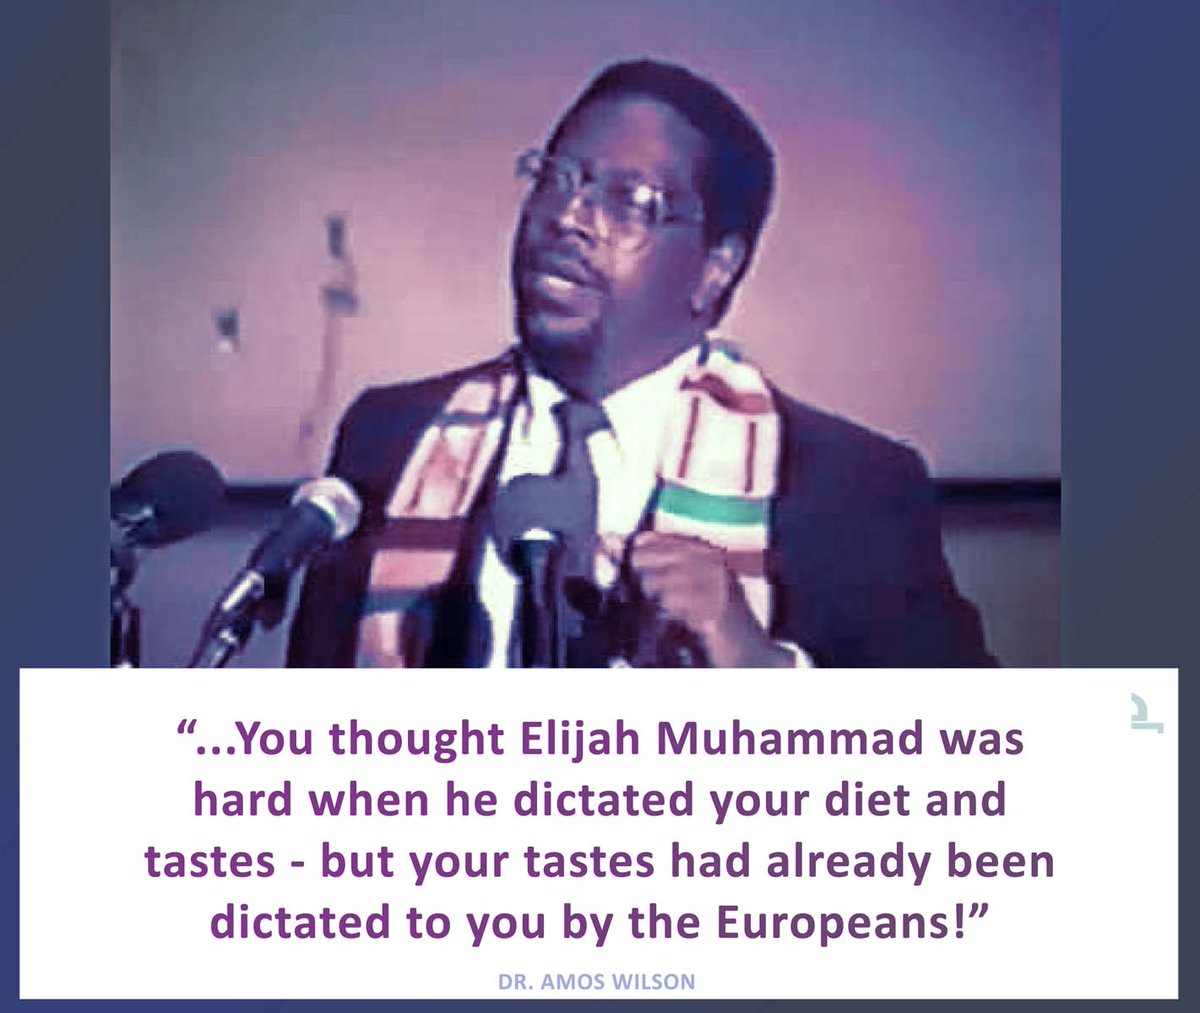 You thought Elijah Muhammad was hard when he dictated your diet and tastes - but your tastes had already been dictated to you by the European!

Dr Amos Wilson 

#elijahMuhammad #Farrakhan #HealthyLiving #black #hiphop  #medicalaparthied #fooddeserts #WhiteSupremacy #genocide